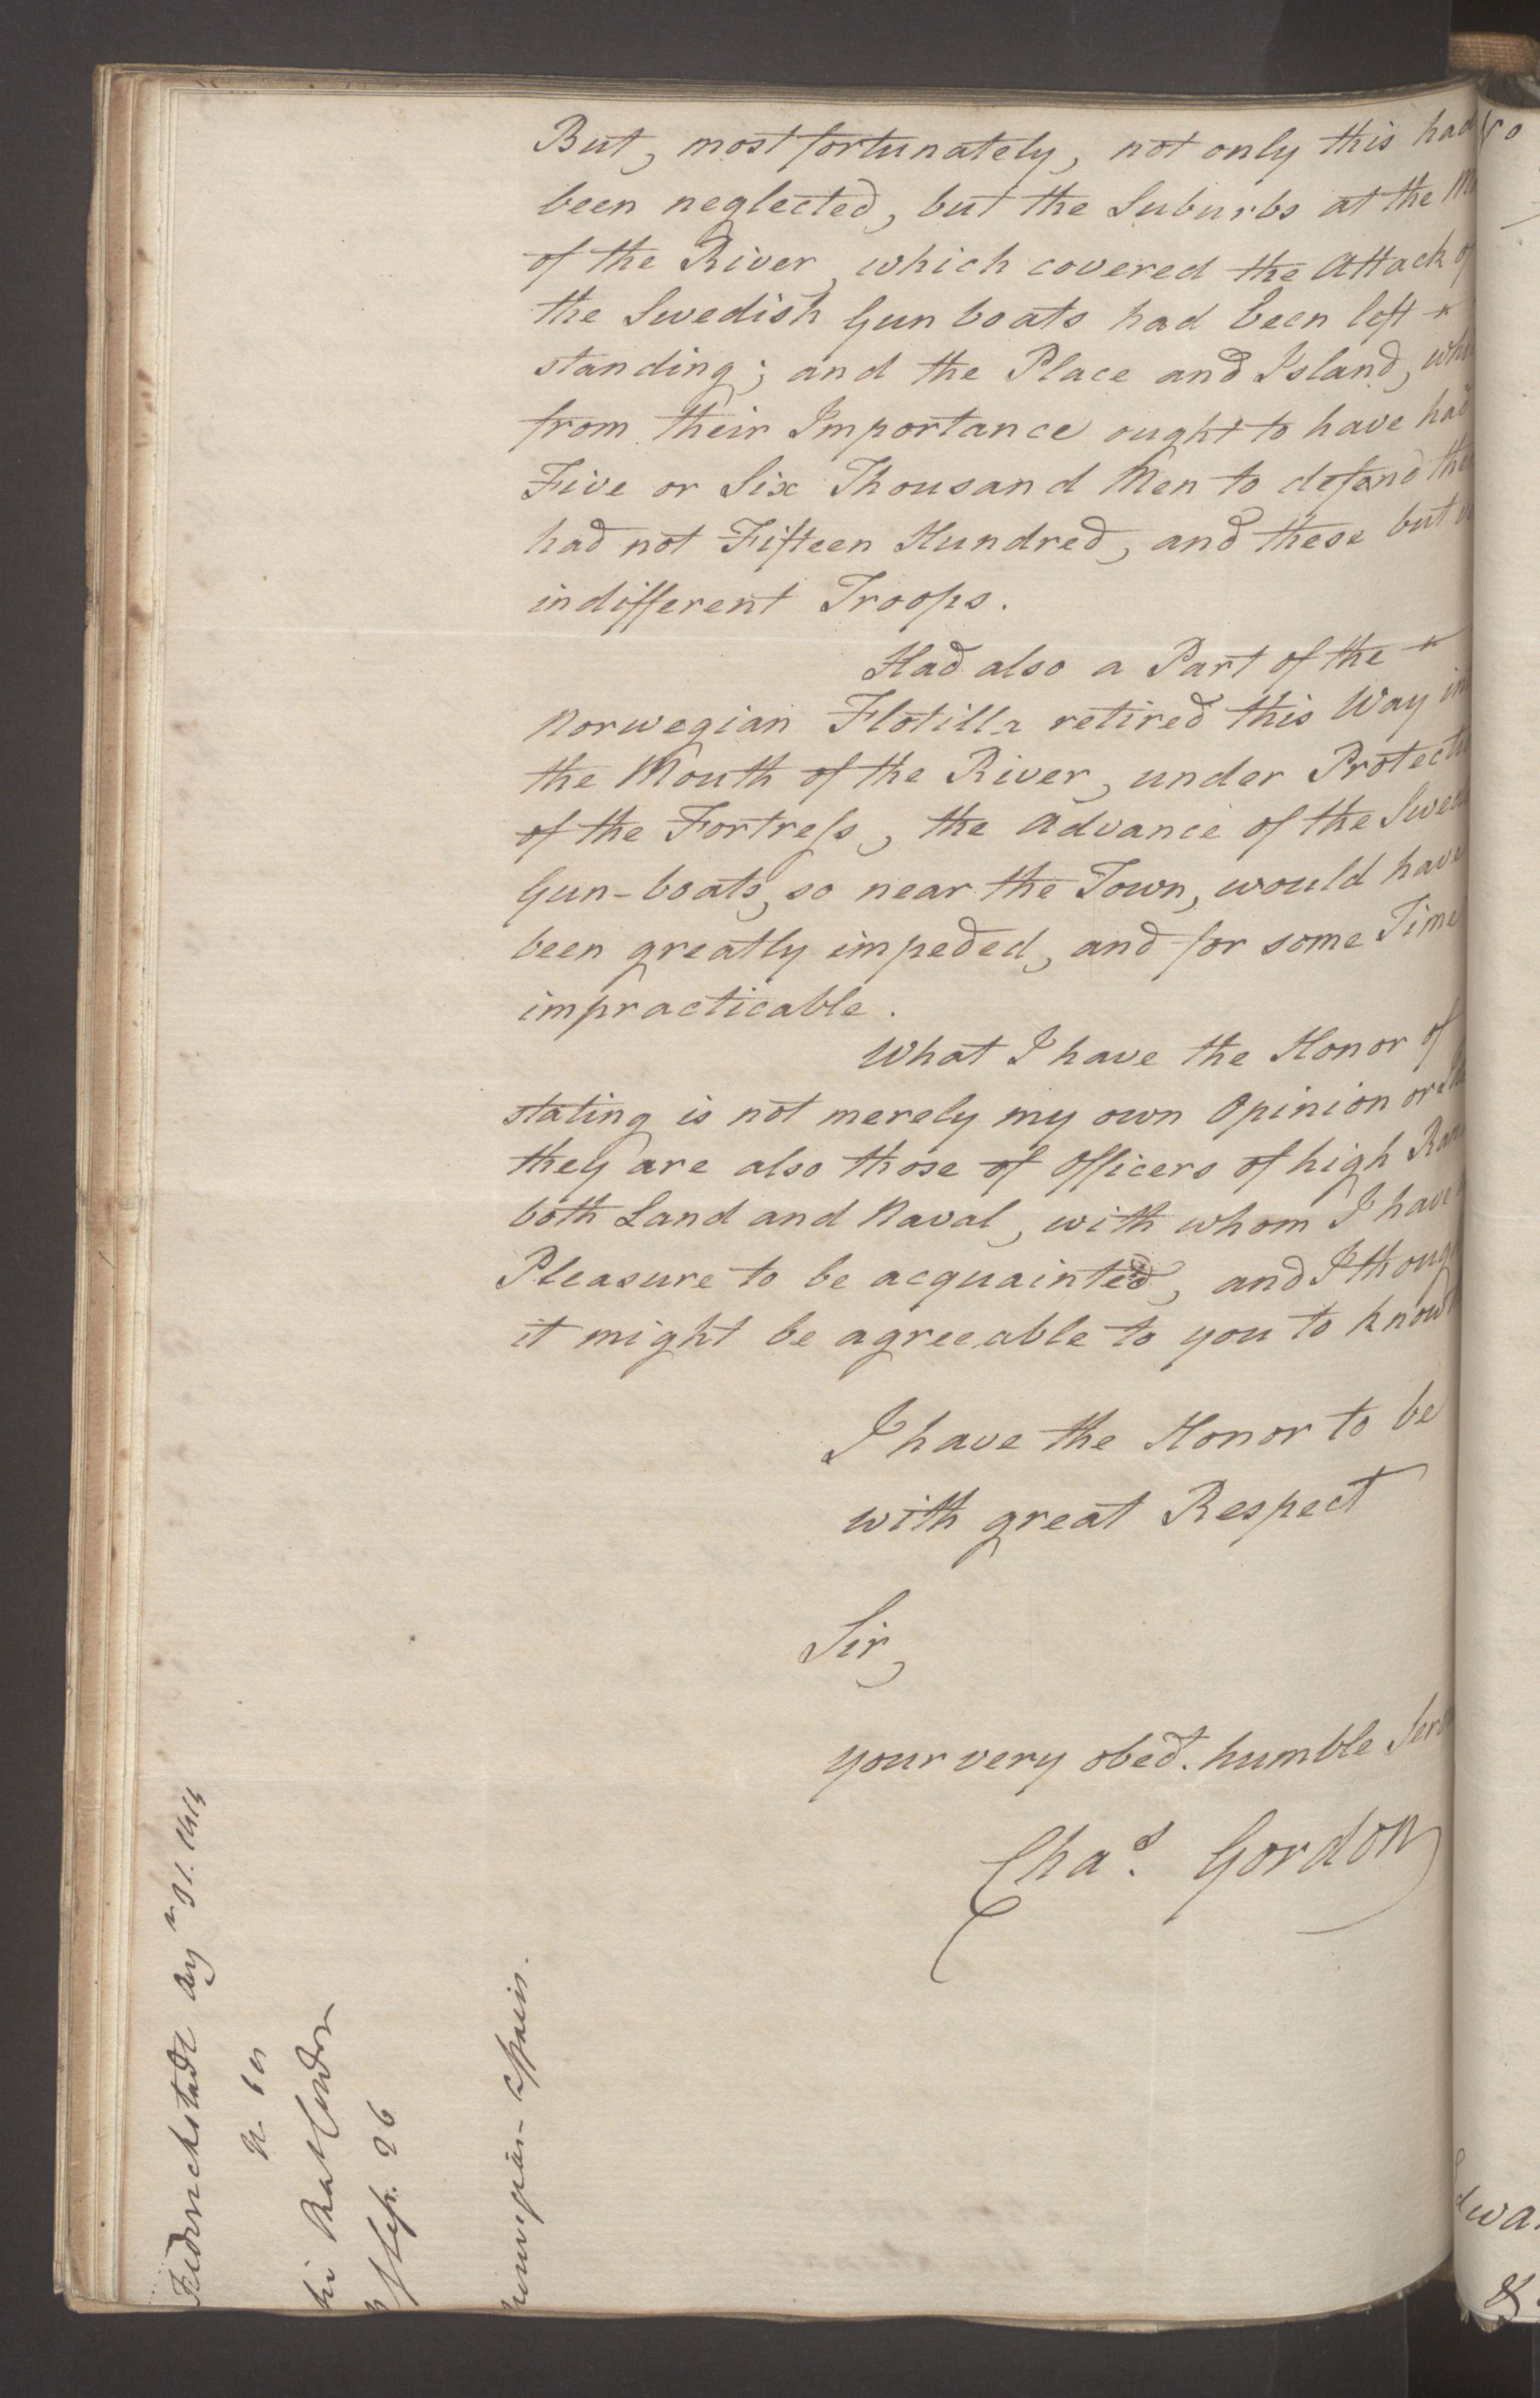 Foreign Office*, UKA/-/FO 38/16: Sir C. Gordon. Reports from Malmö, Jonkoping, and Helsingborg, 1814, p. 106